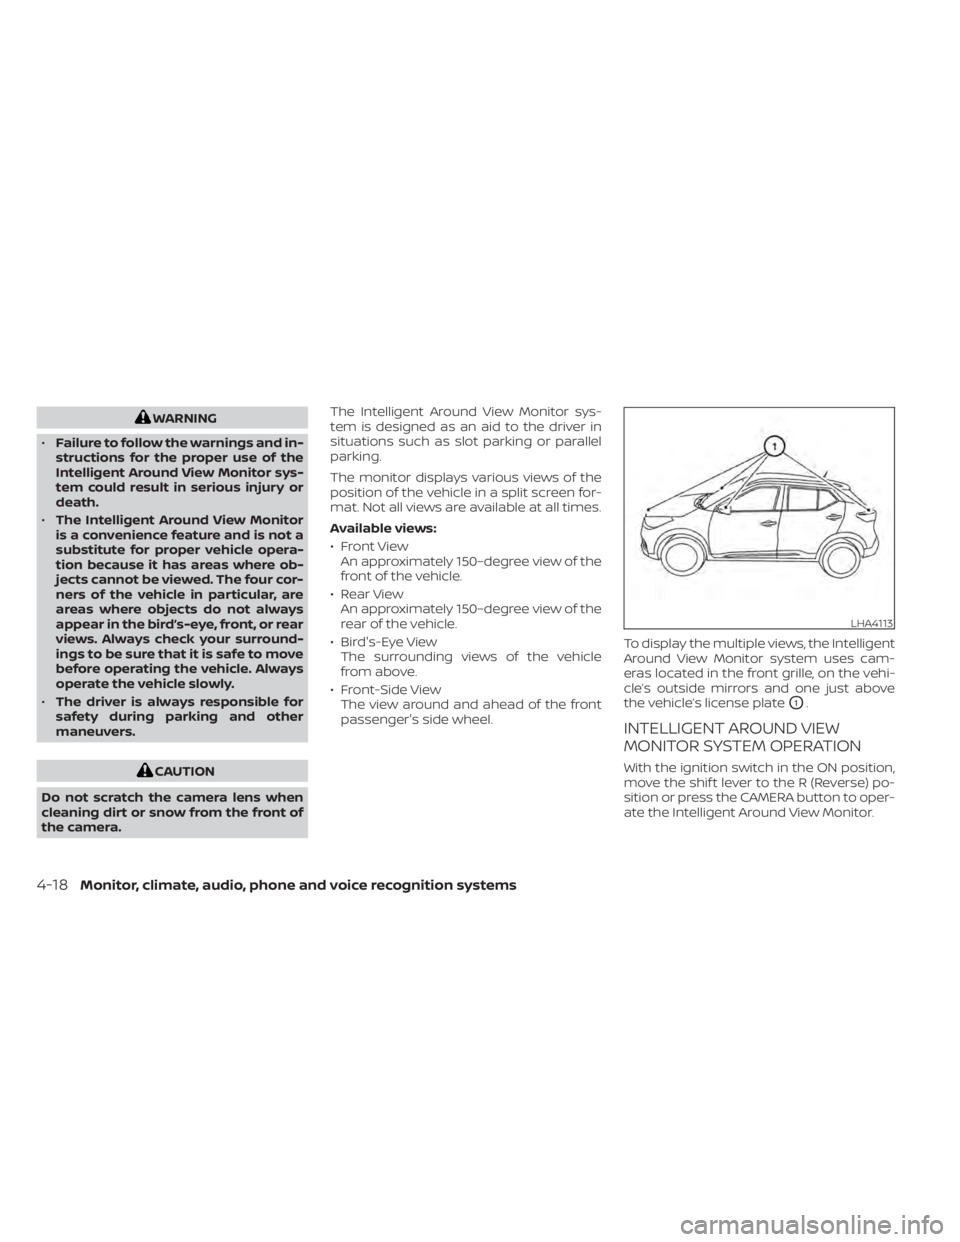 NISSAN KICKS 2022  Owners Manual WARNING
• Failure to follow the warnings and in-
structions for the proper use of the
Intelligent Around View Monitor sys-
tem could result in serious injury or
death.
• The Intelligent Around Vie